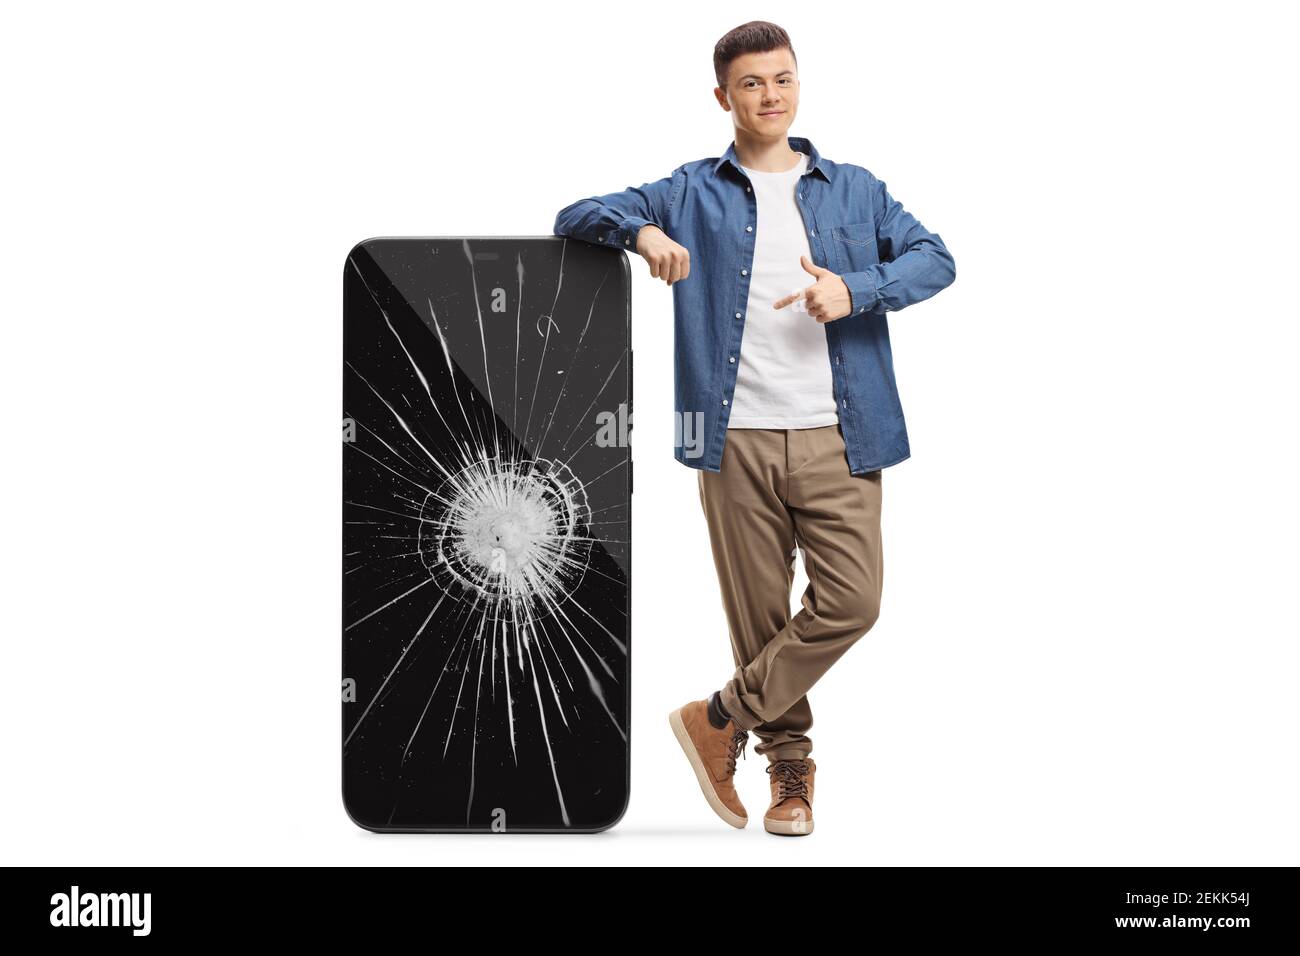 Full length portrait of a guy leaning on a big mobile phone with a broken screen and pointing isolated on white background Stock Photo